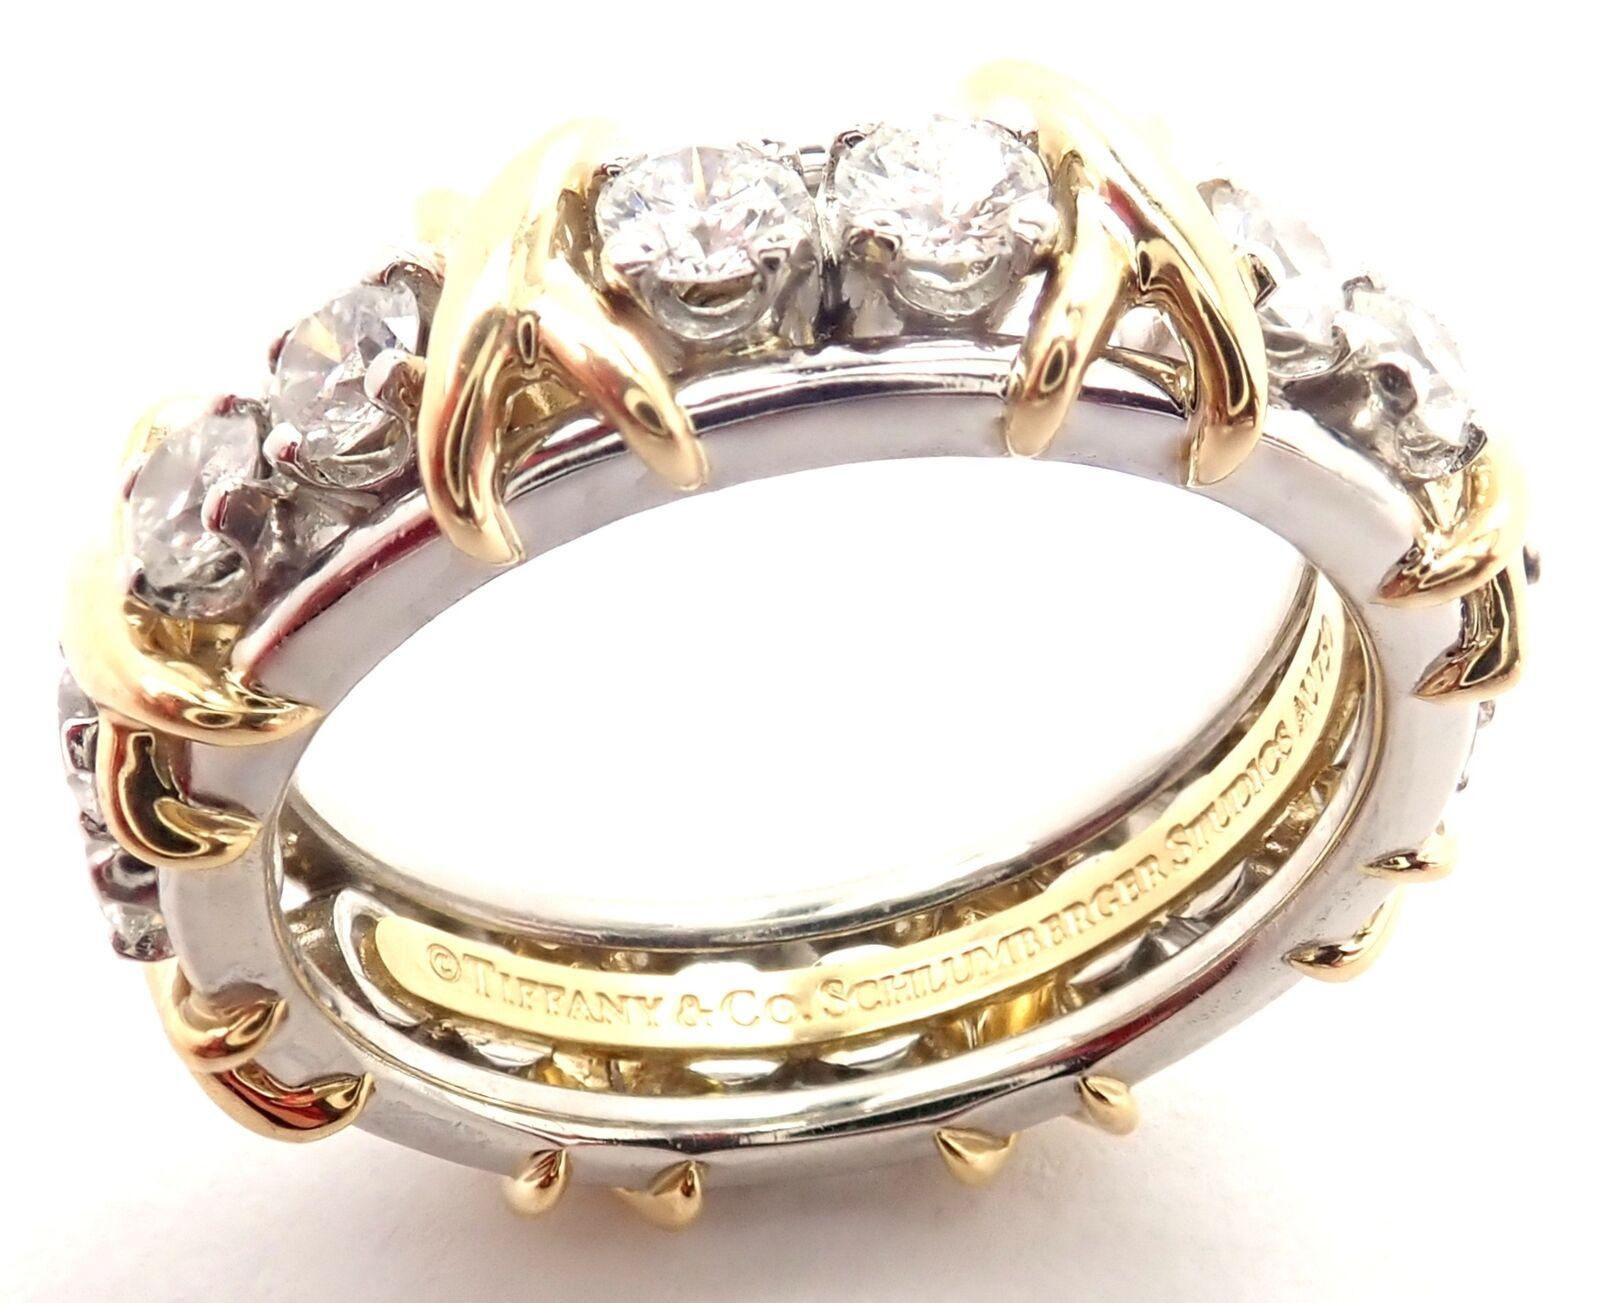 Tiffany & Co. Jean Schlumberger Diamond Yellow Gold and Platinum Band Ring 2